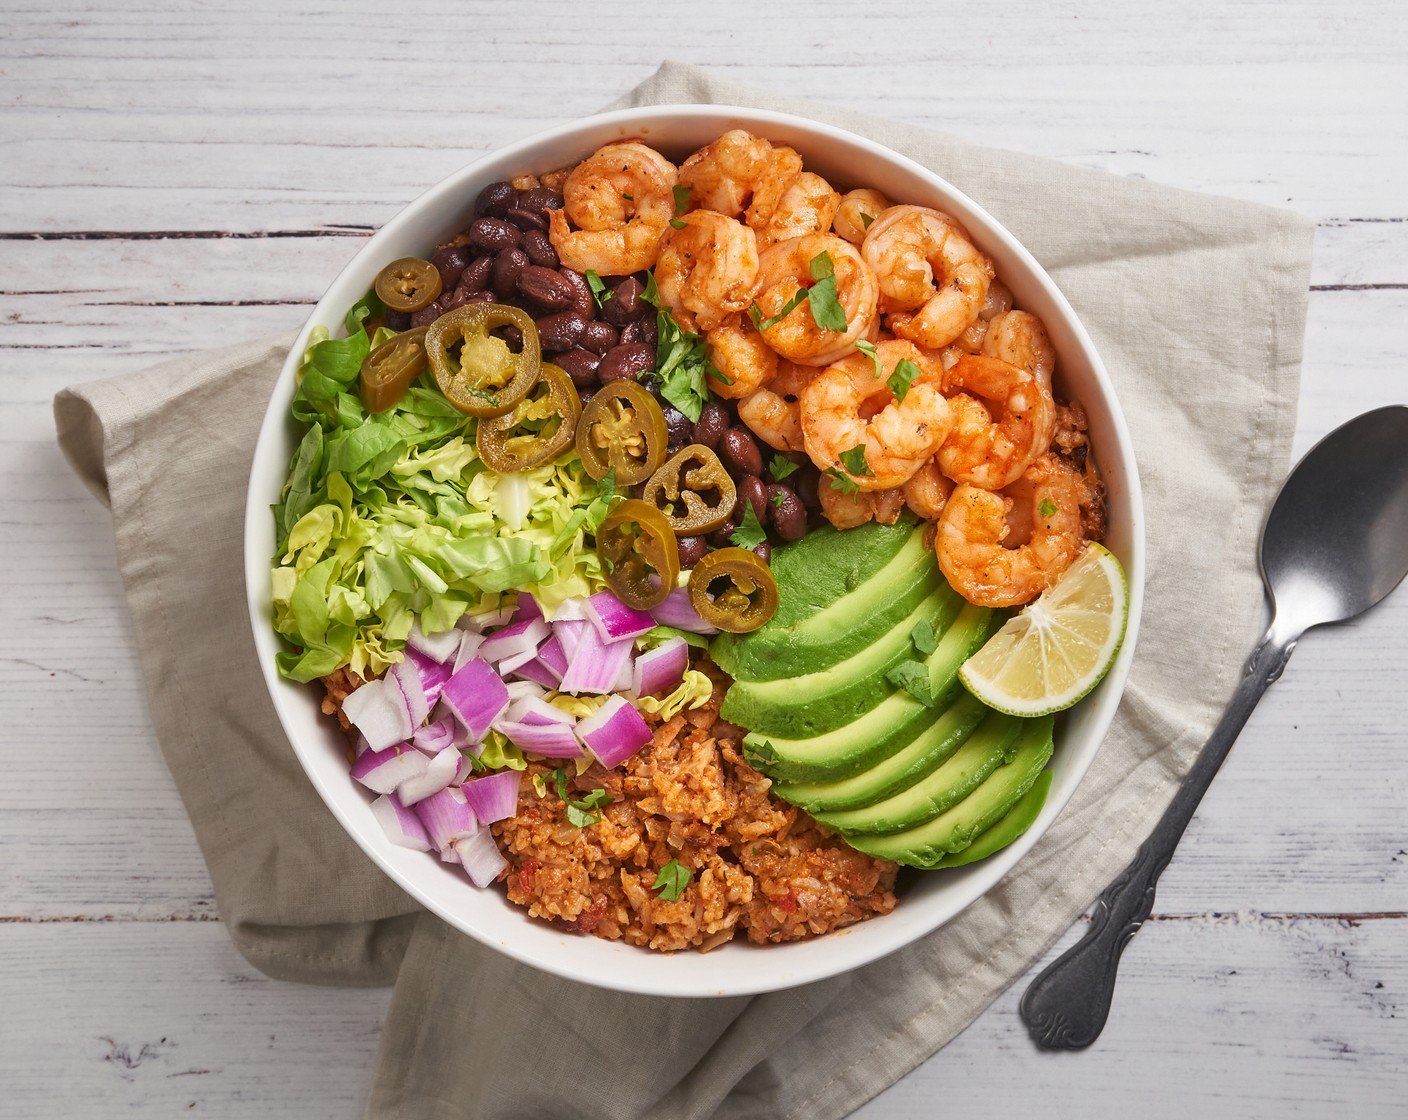 step 5 Transfer jambalaya rice to a serving bowl. Top with Lettuce (2 cups), Black Beans (1 can), Avocados (3), Red Onion (1), Pickled Jalapeño Pepper (1 cup), and Fresh Cilantro (1/2 bunch). Enjoy it warm.